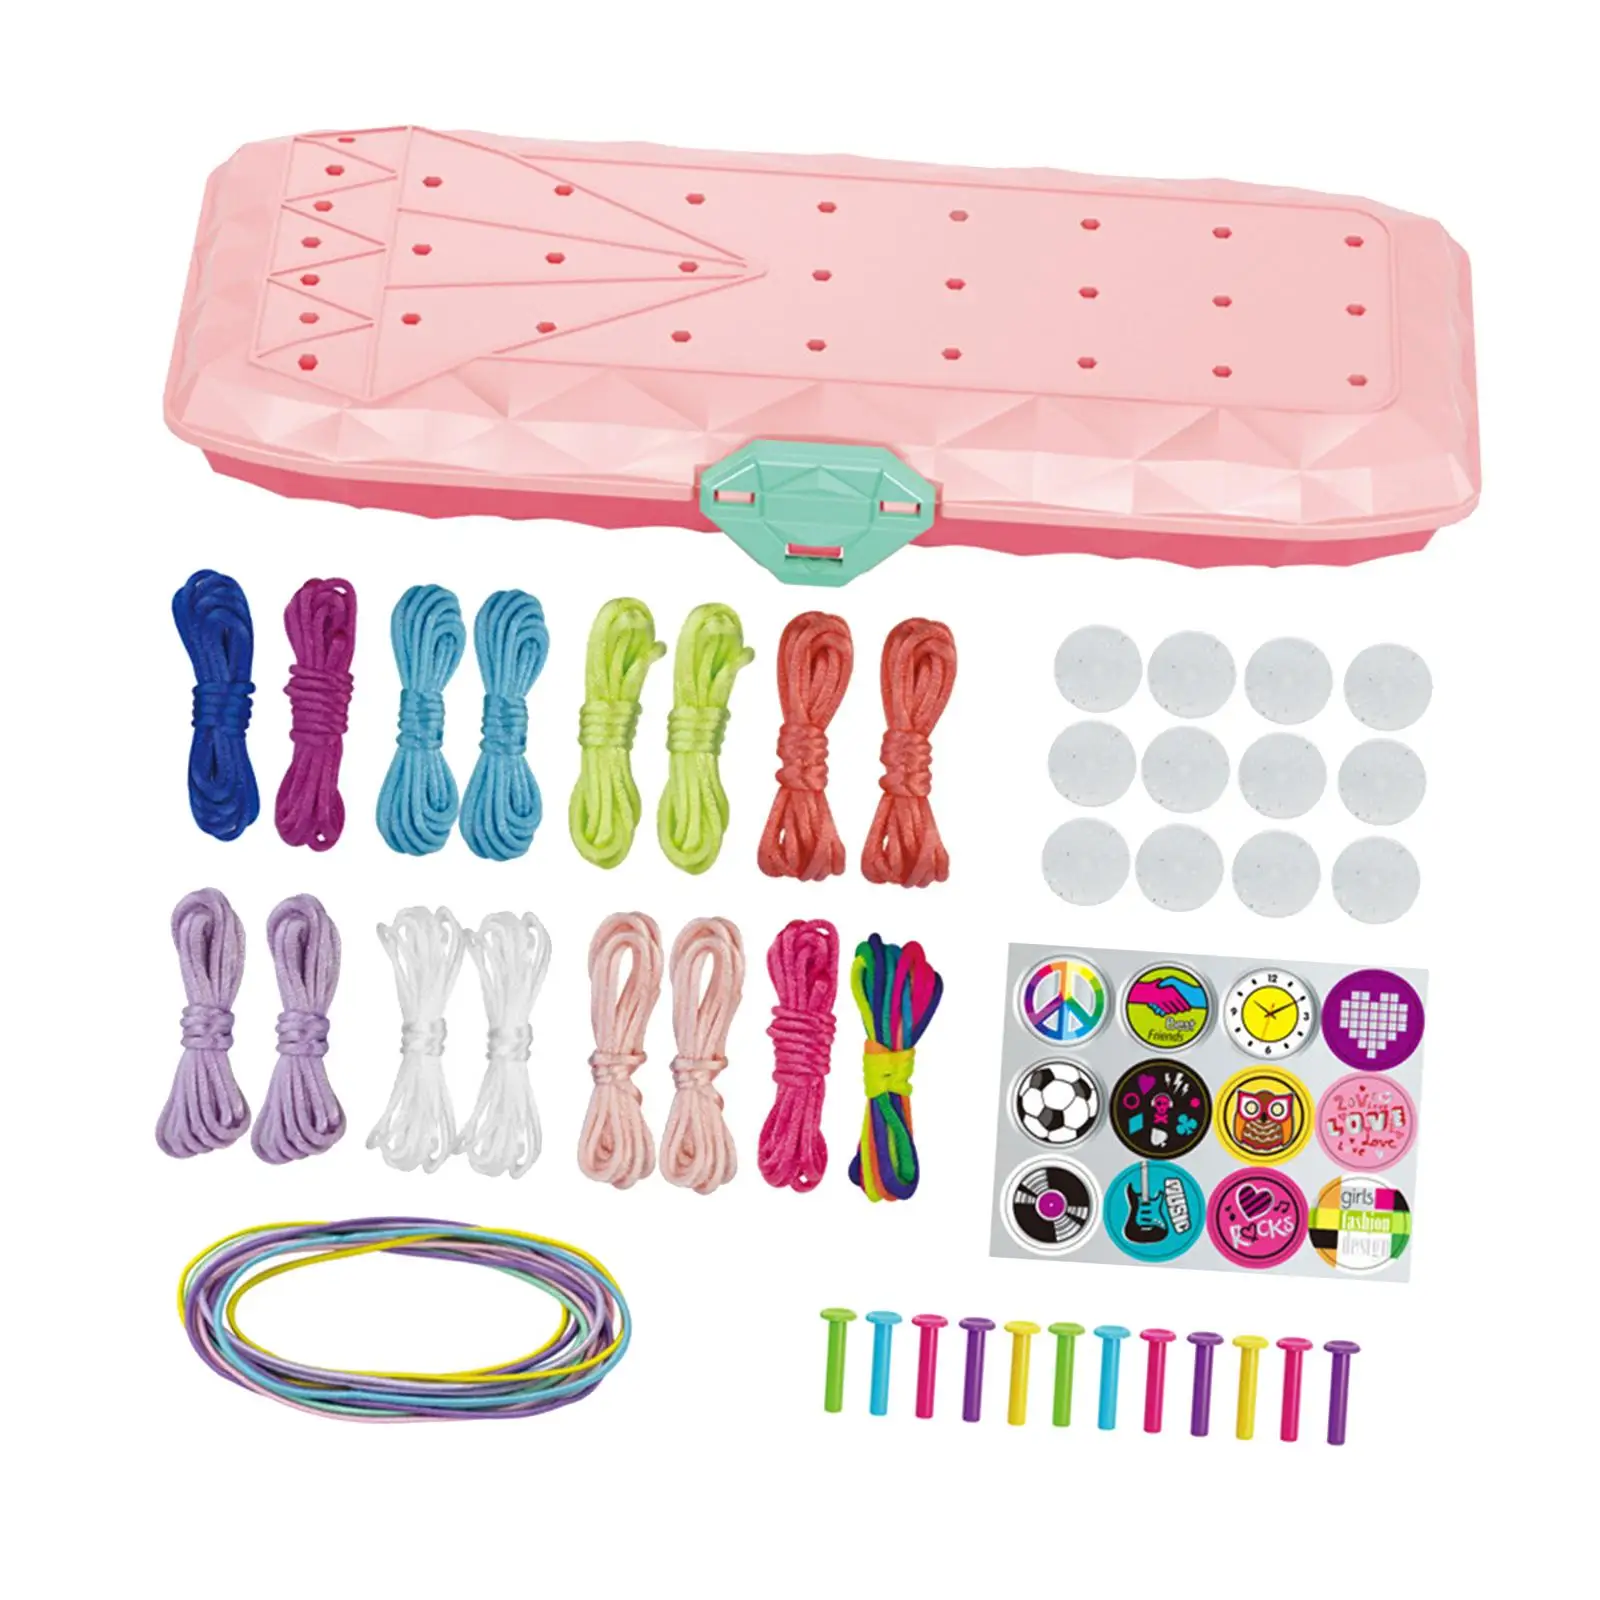 

Bracelet Making Kit Braiding Loom Multicolored Elastic Rope Braiding Rope Buttons Craft Jewelry Kit for Beginners Women Holidays